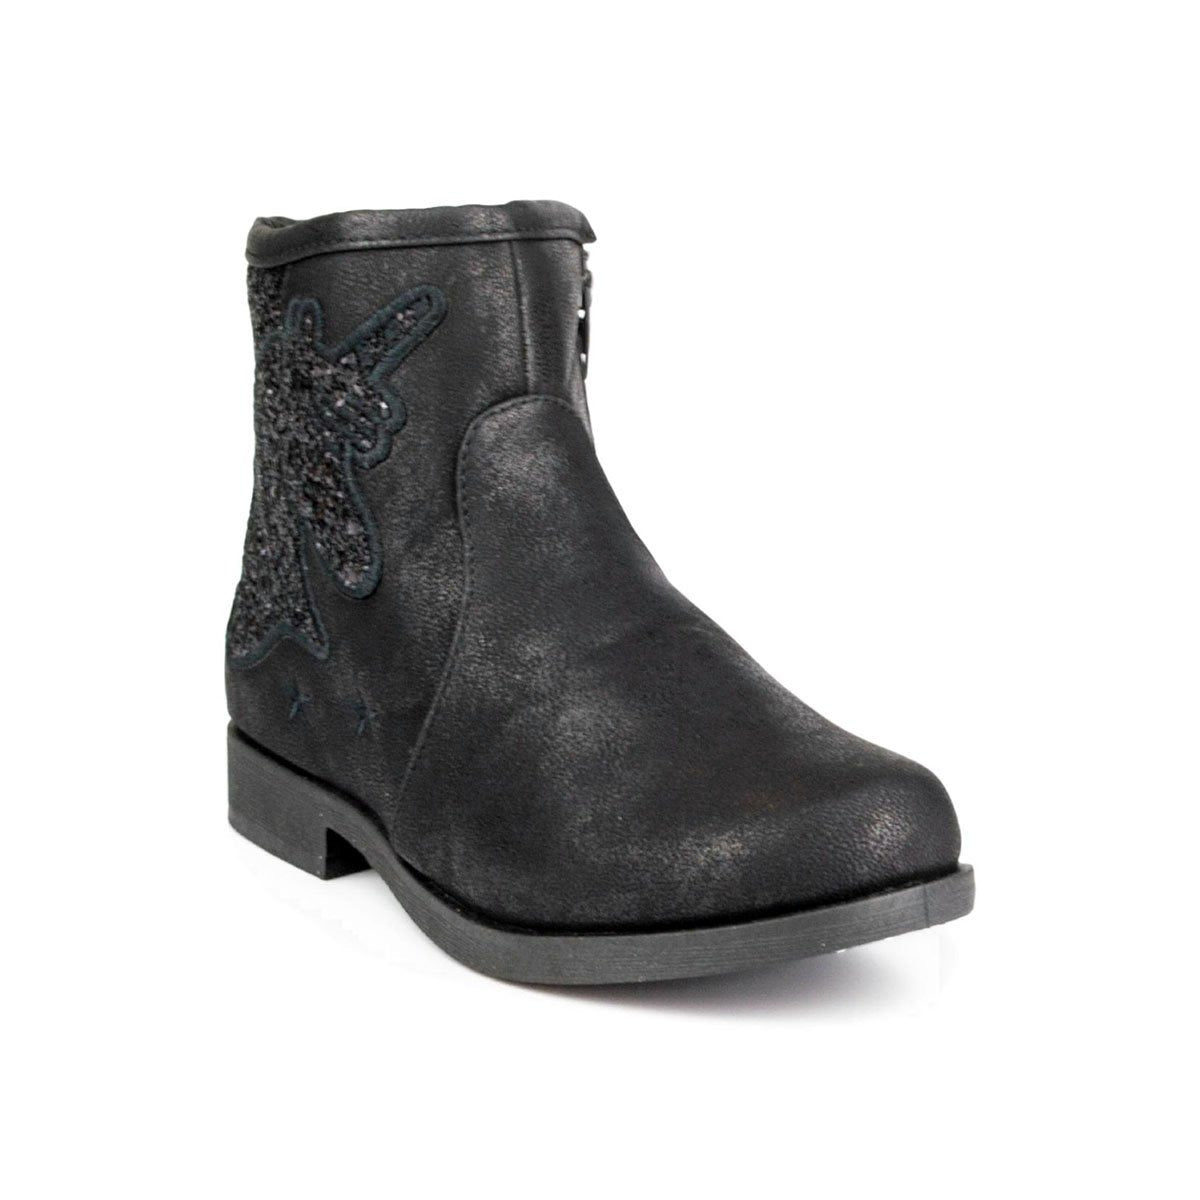 Girls Black Zip Up Ankle Boot - Watney Shoes 